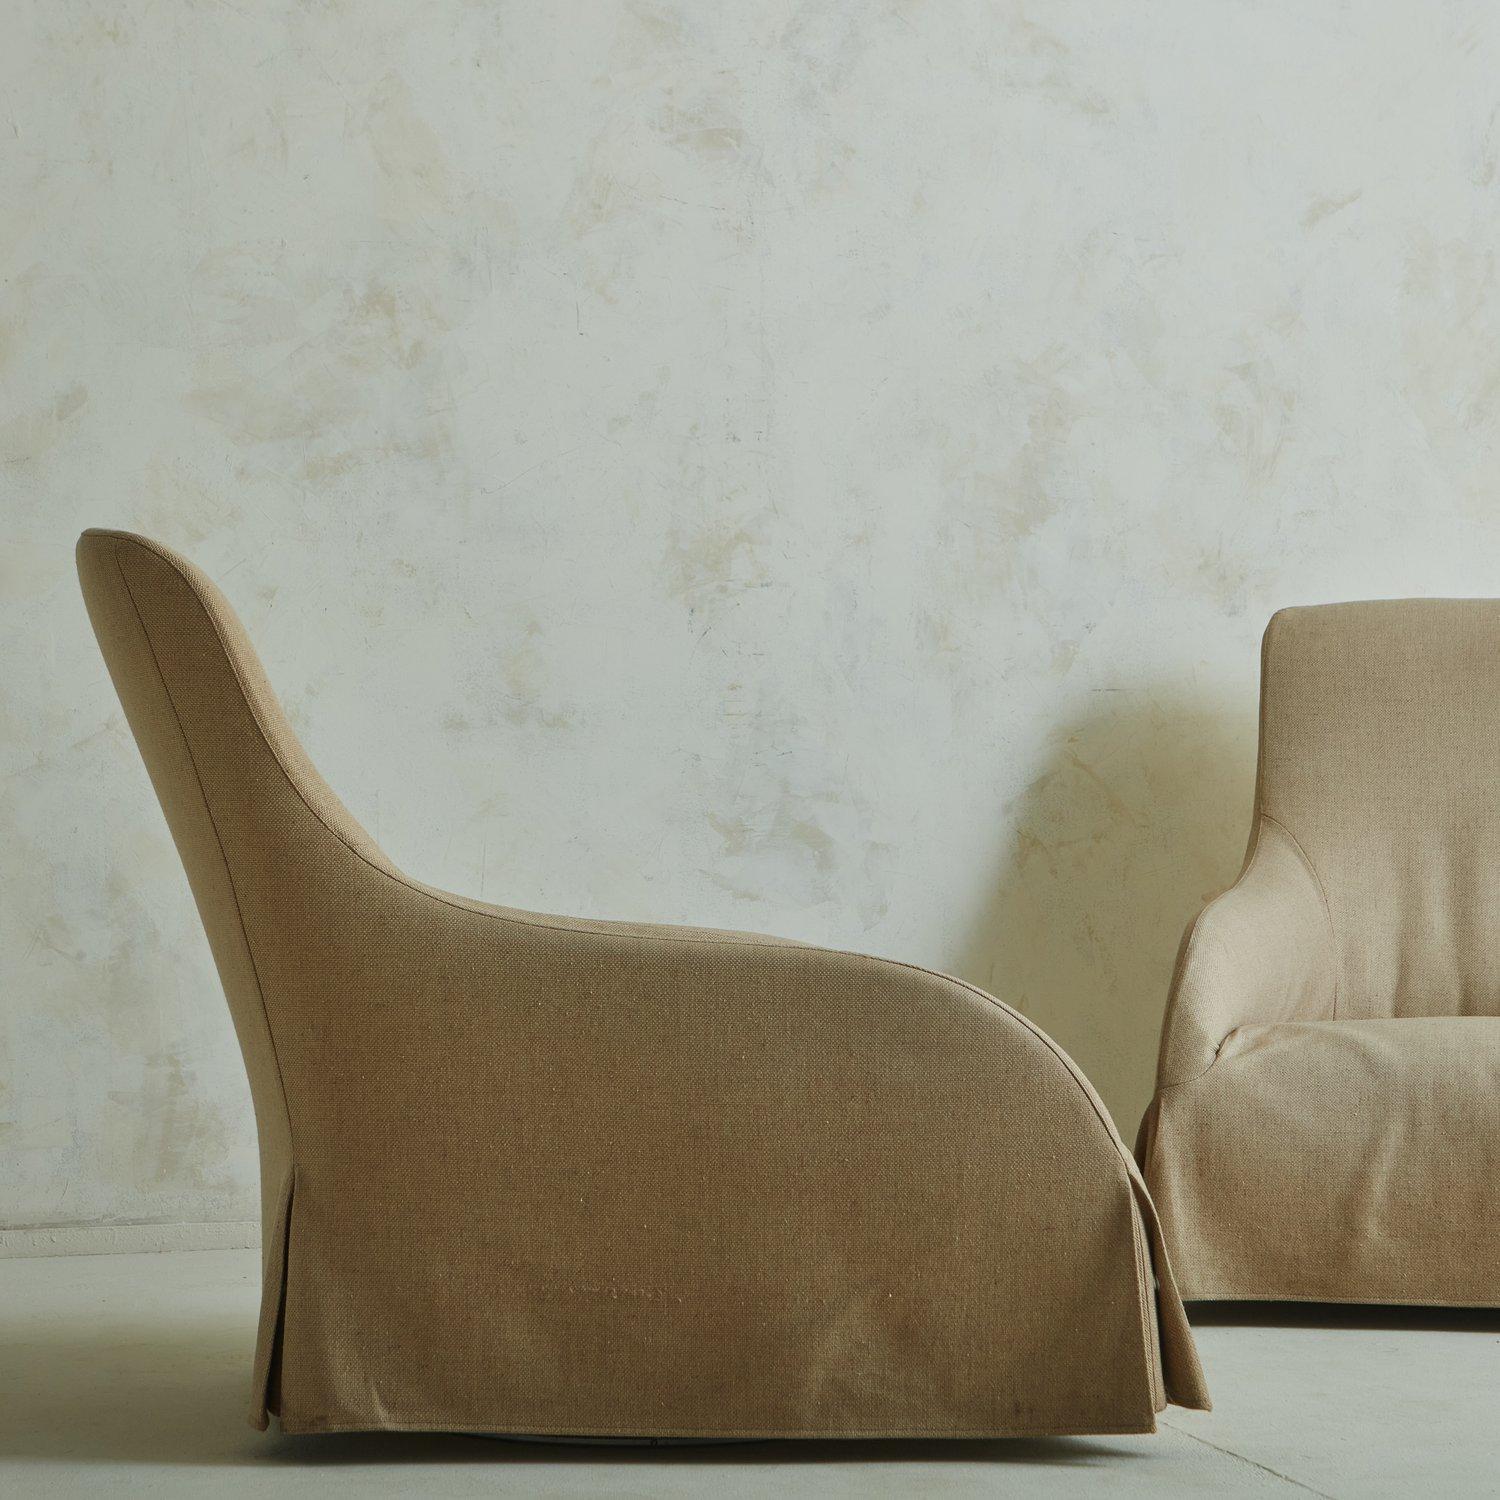 Contemporary Pair of ‘Kalos’ Swivel Lounge Chairs with Slipcover by Antonio Citterio, 2000s